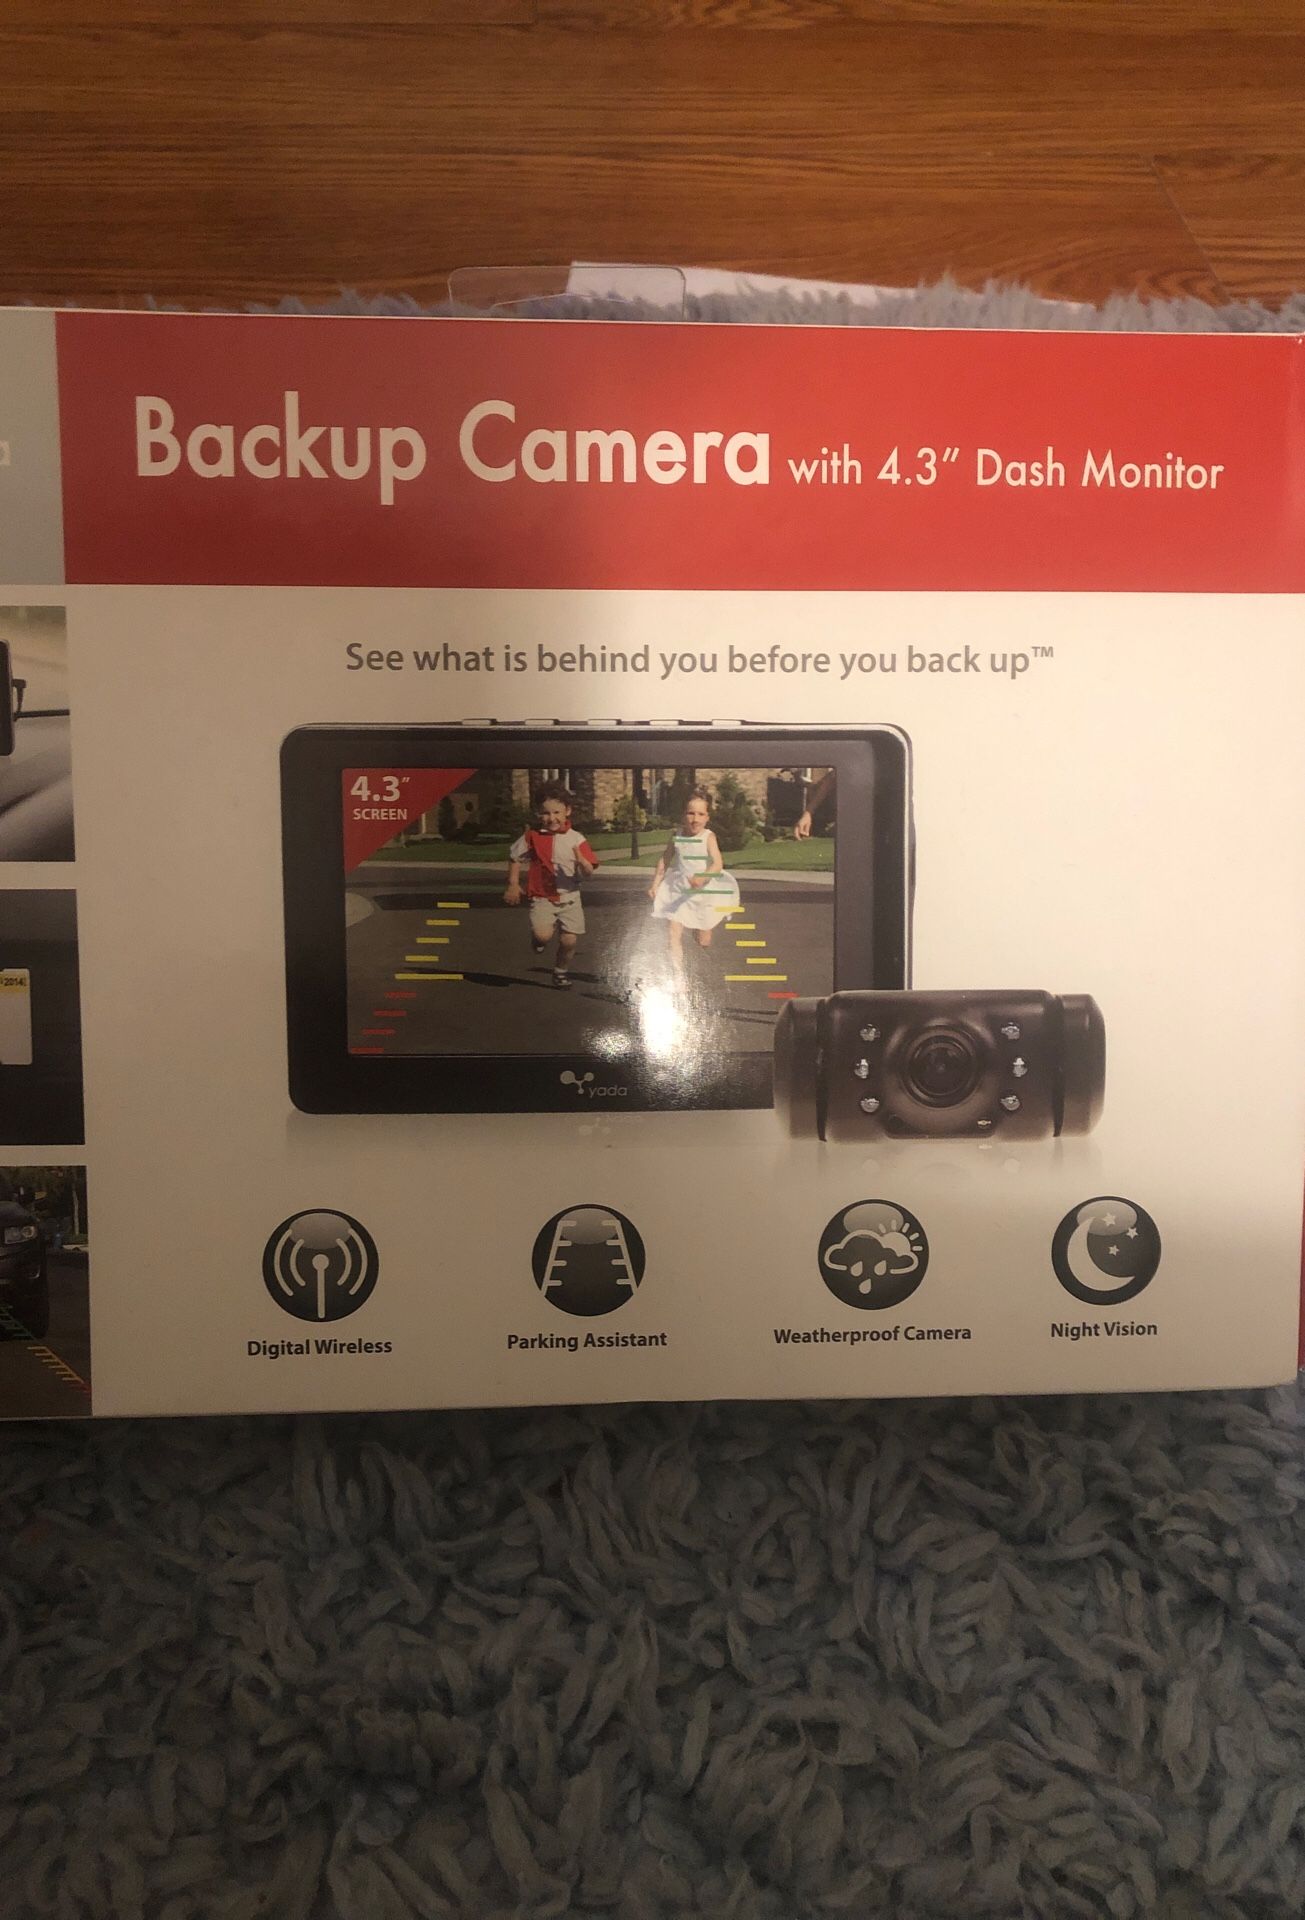 Back up camera with 4.3 dash monitor